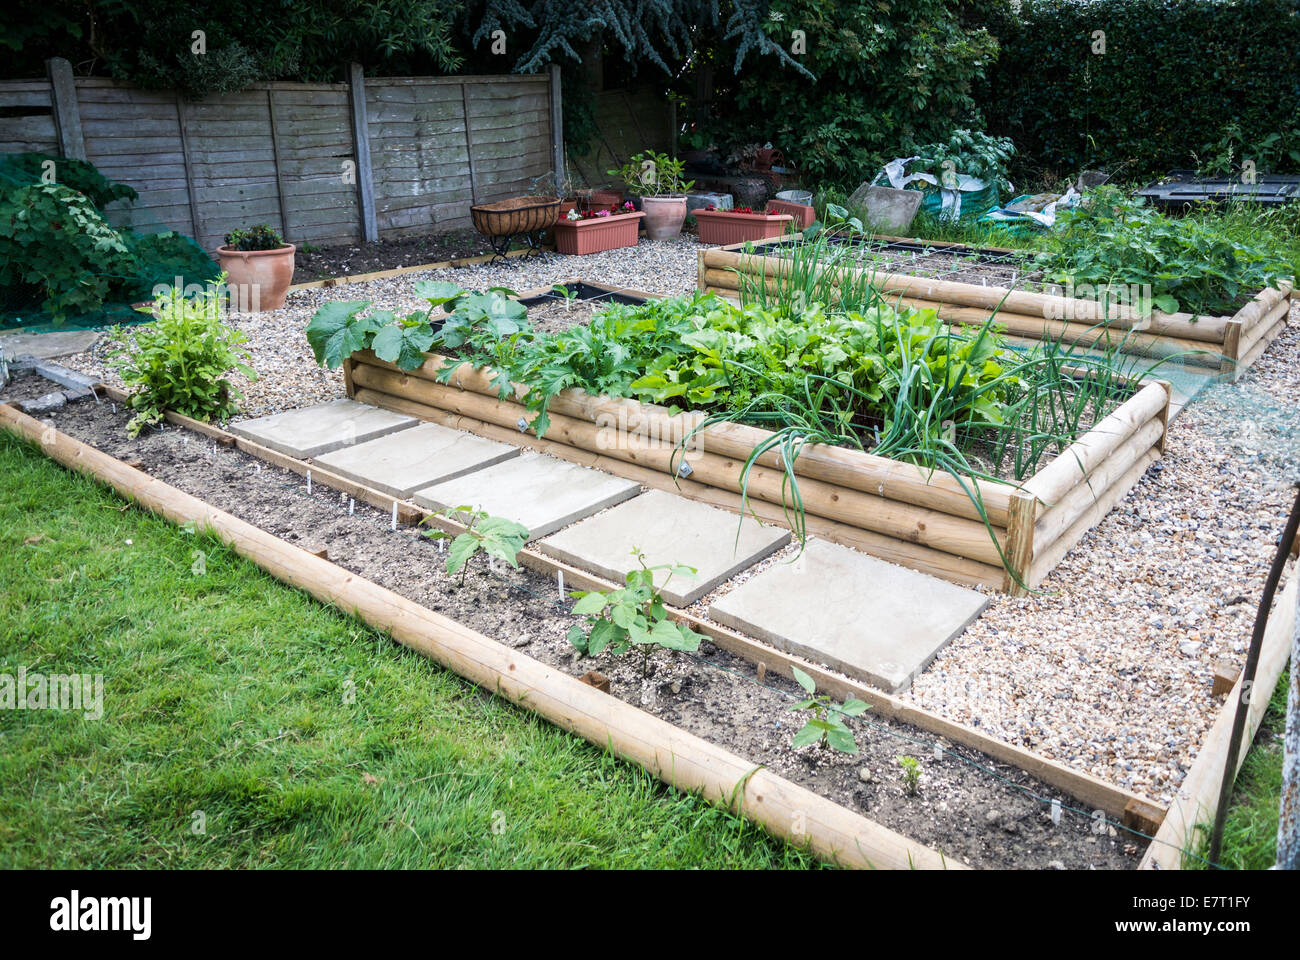 Garden vegetable patch depicting square foot gardening Stock Photo